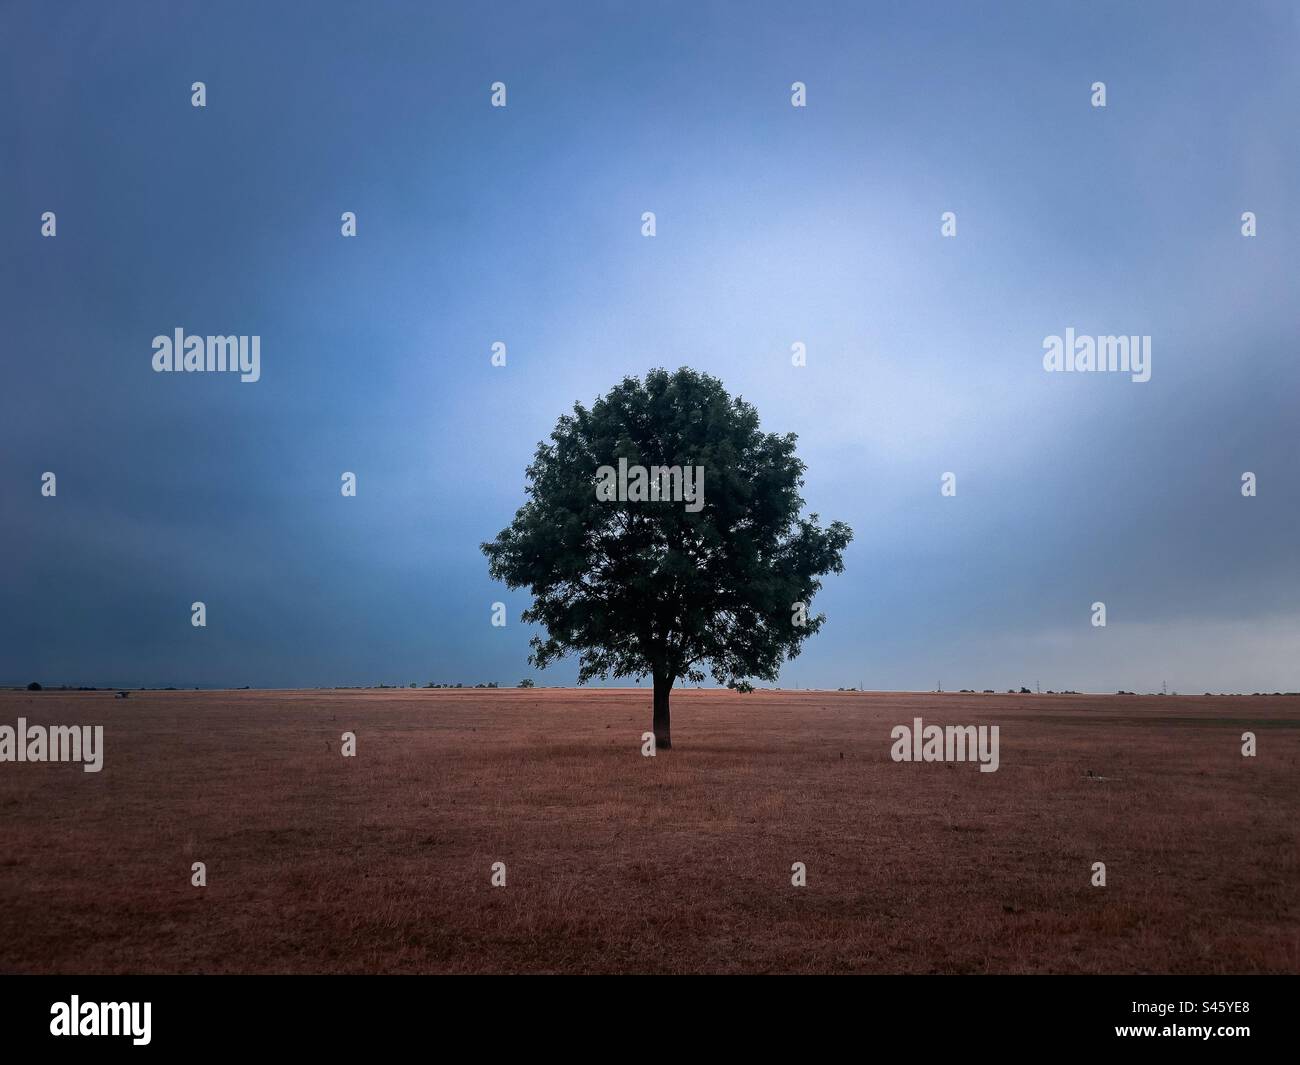 Lonely tree in the middle of a field on a cloudy day Stock Photo